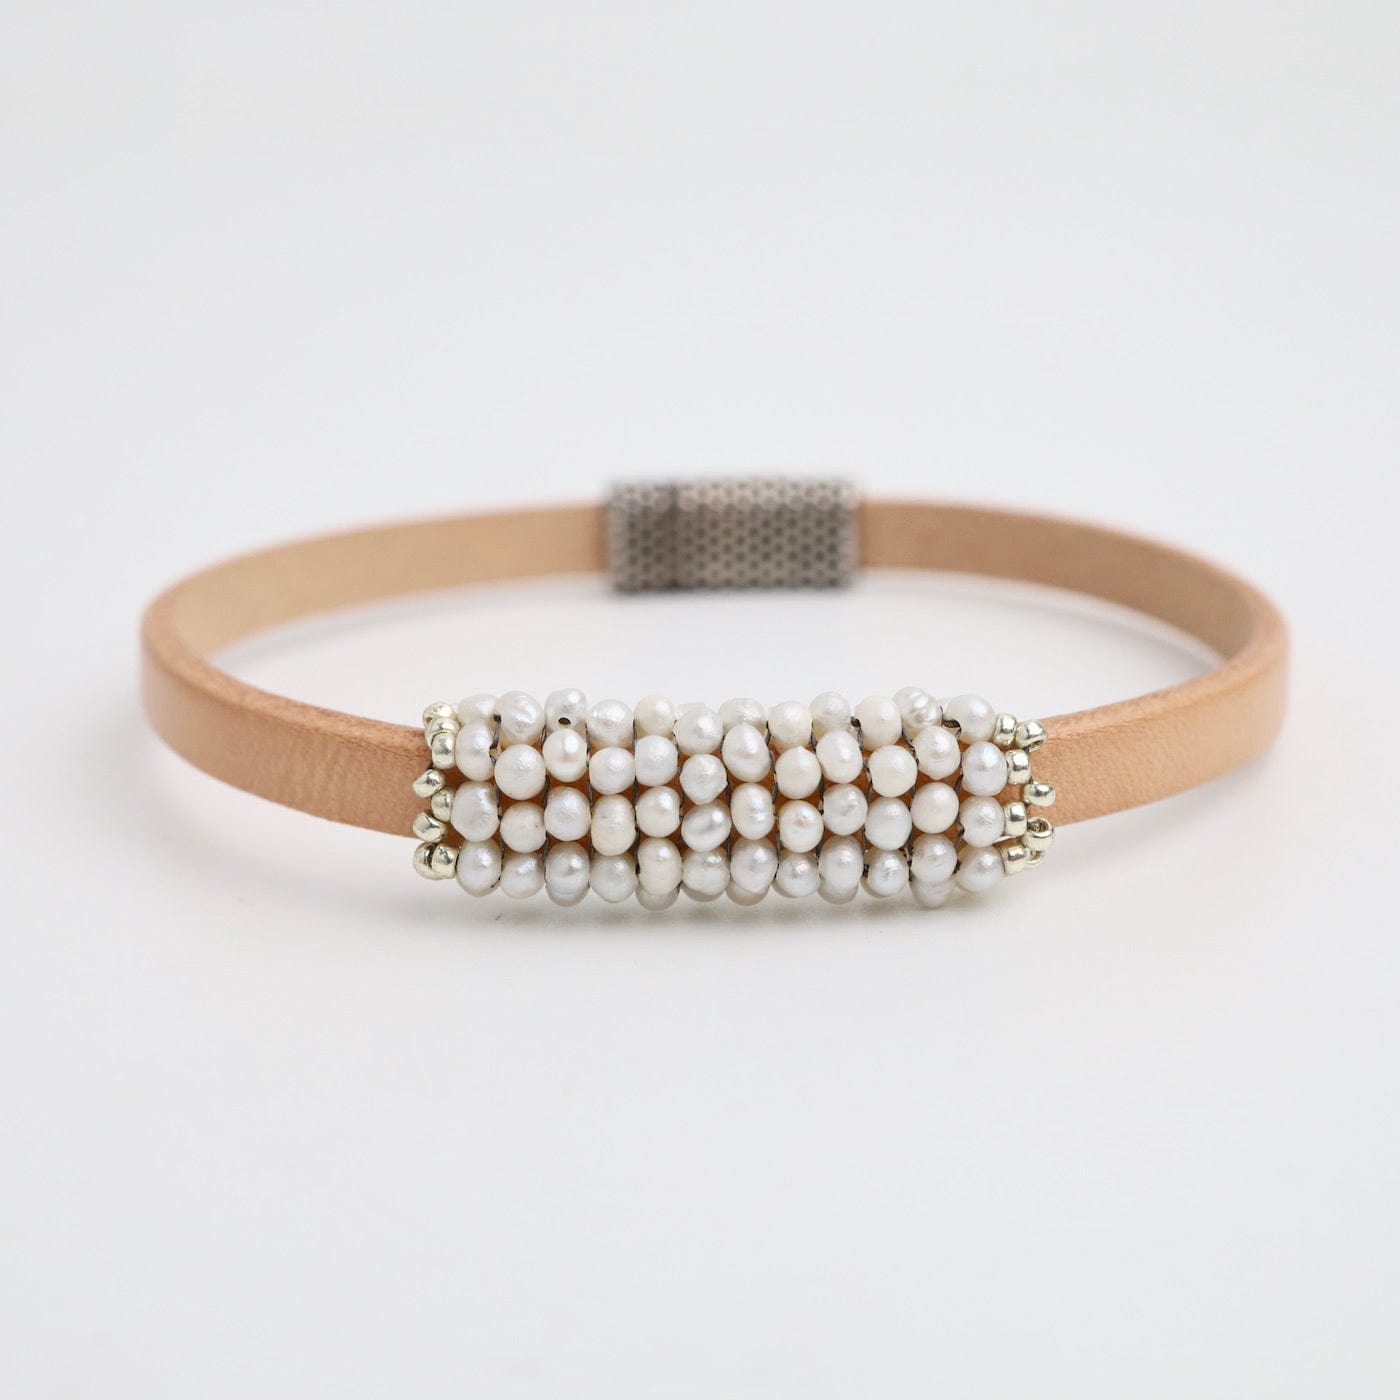 BRC-JM Hand Stitched White Seed Pearls Leather Bracelet